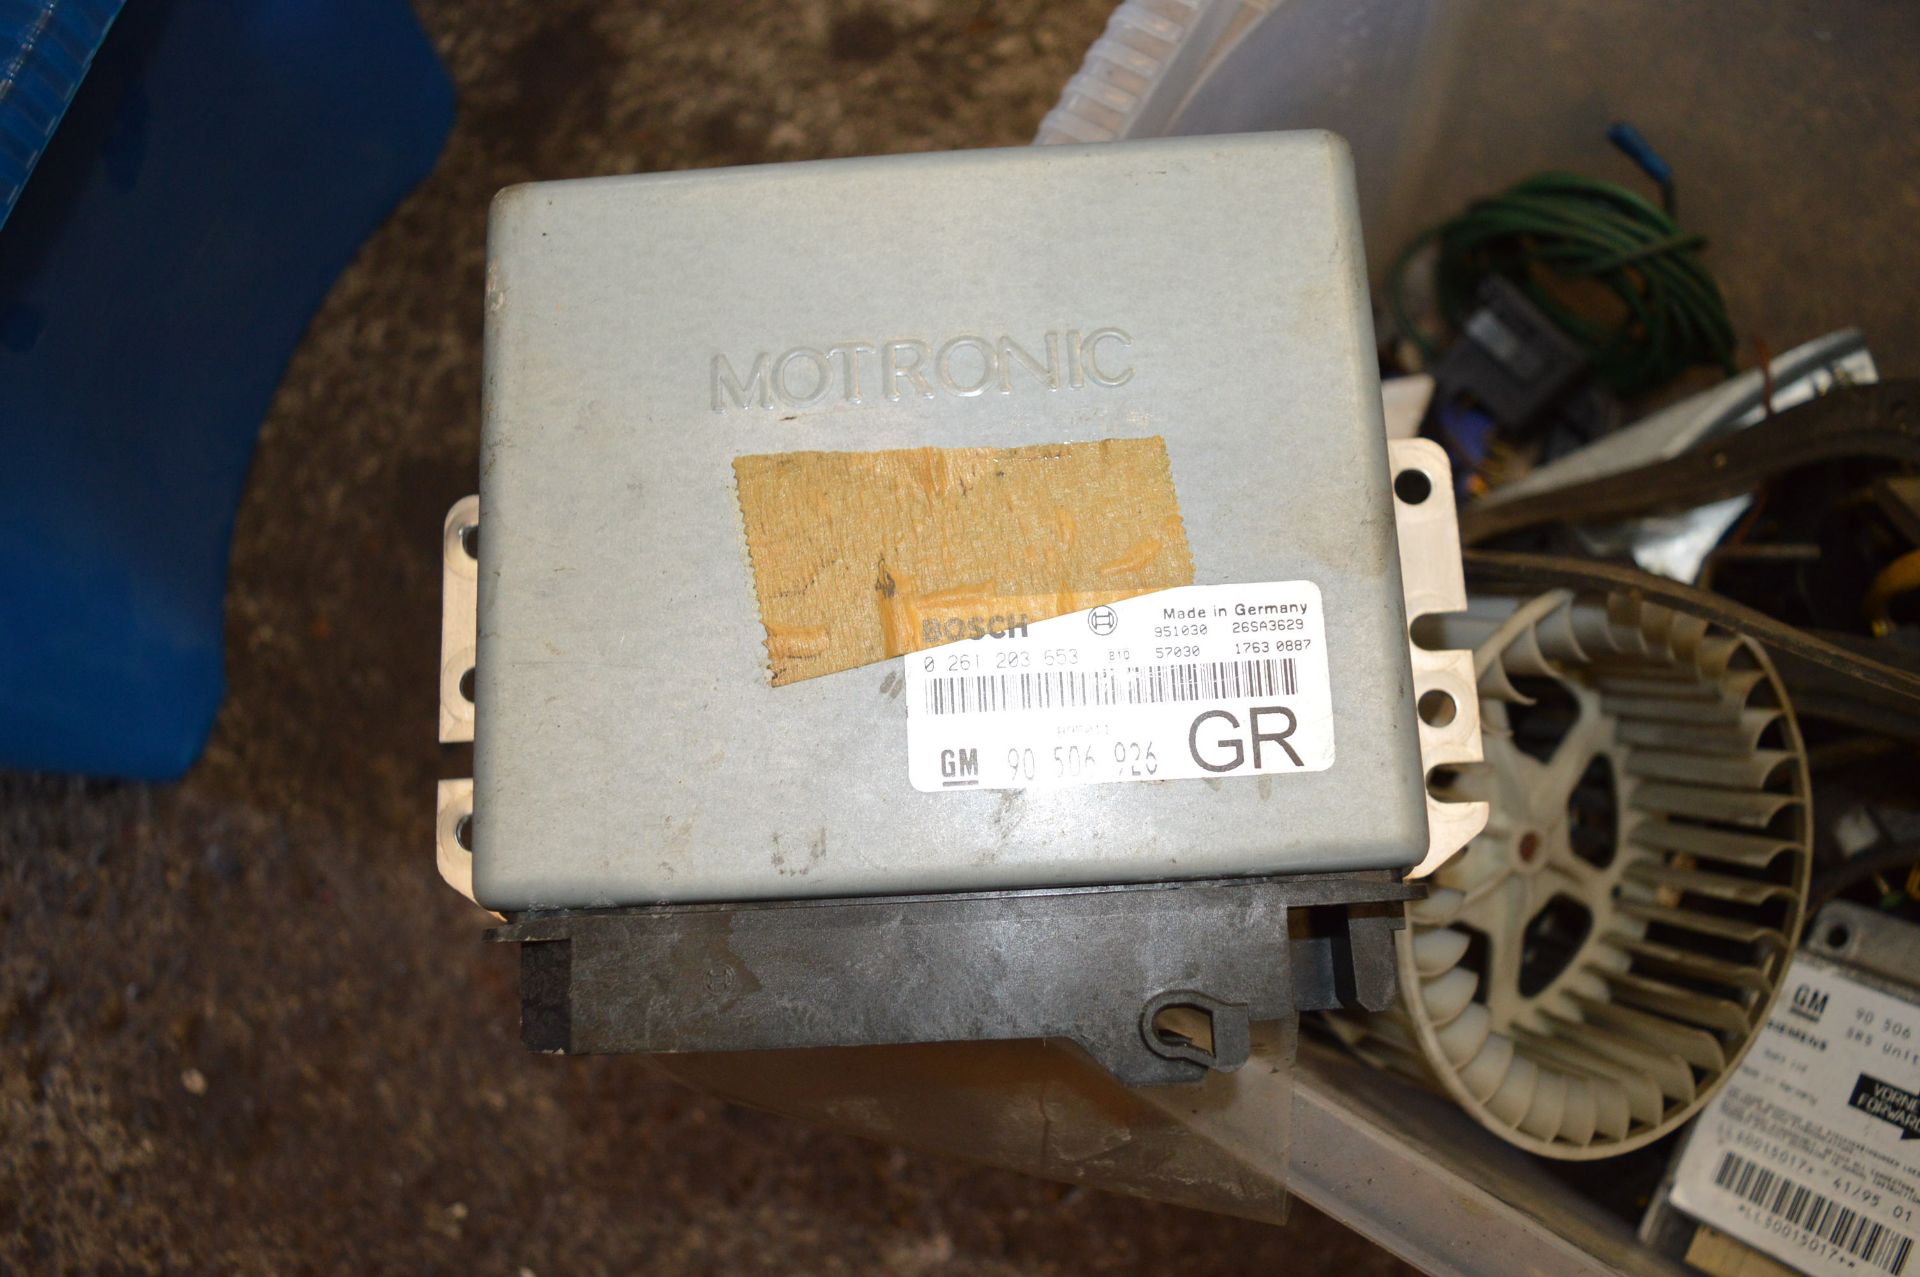 Box Containing Heater Motor, Switches, and an ACU - Bild 2 aus 4